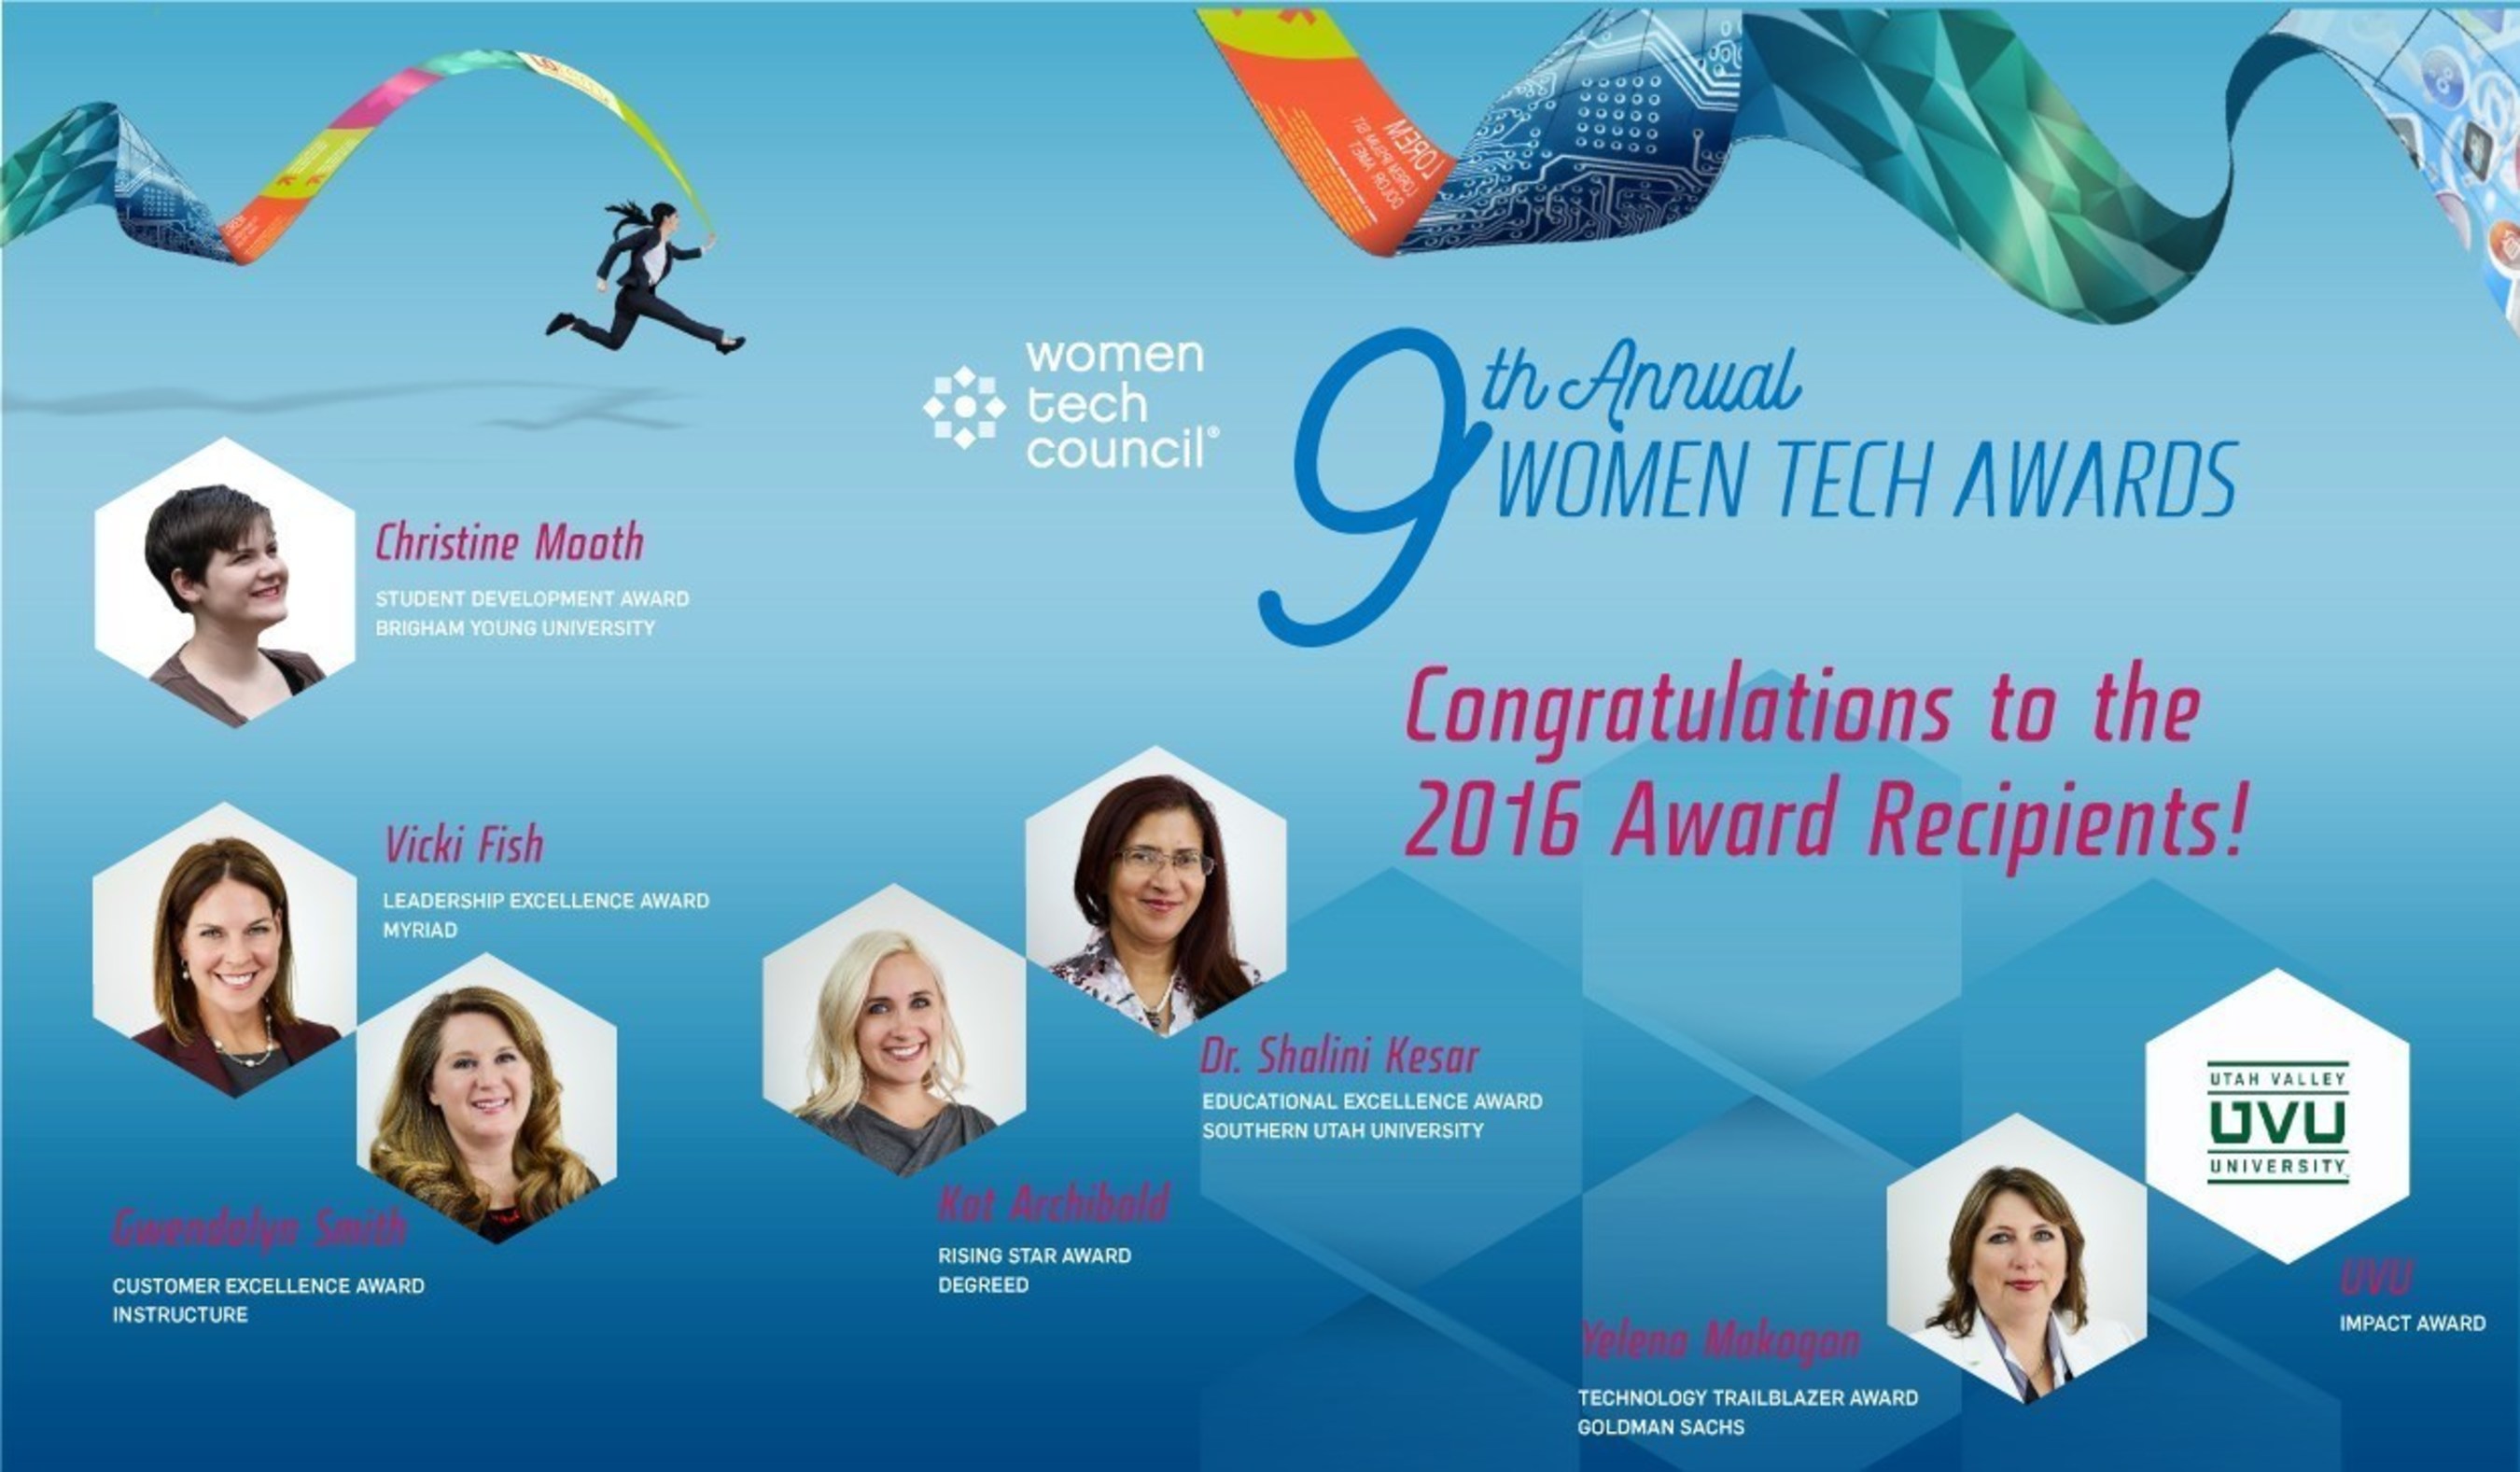 The Women Tech Council (WTC) recognized seven technology-focused women who are driving innovation, leading technology companies and contribution to the technology economy in the Ninth Annual Women Tech Awards.